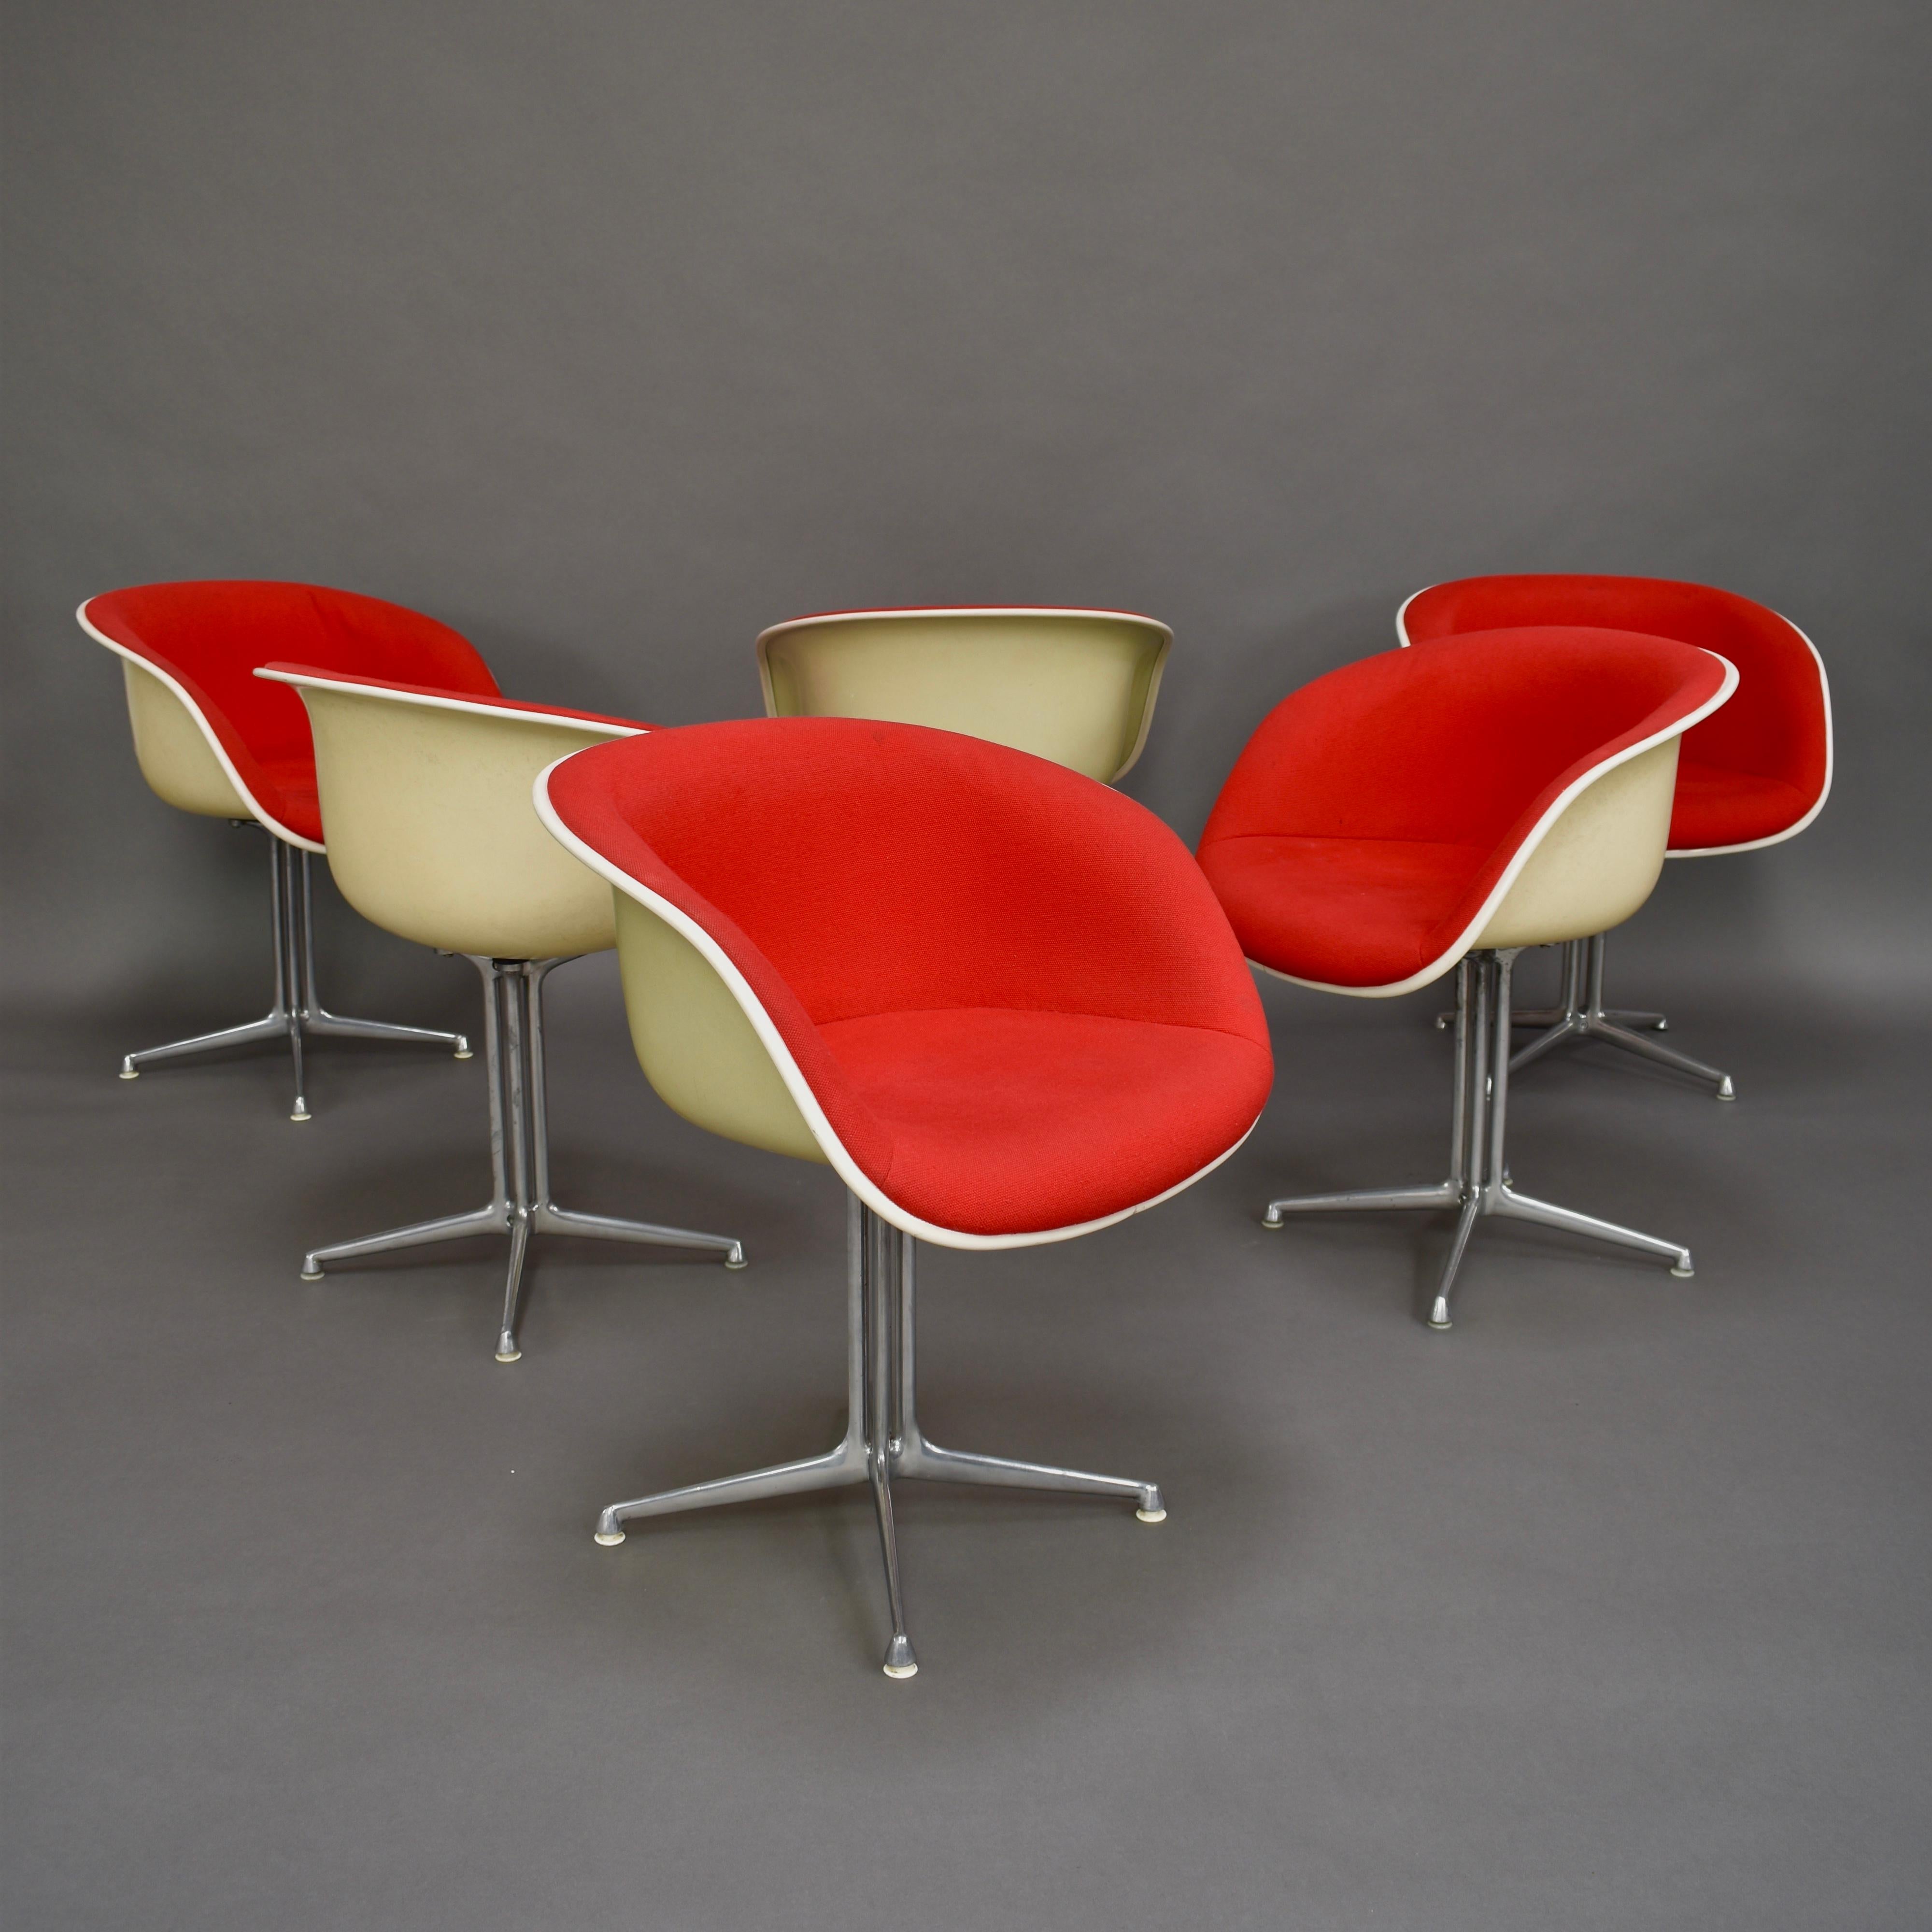 Very cool set of six La fonda fiberglass and red fabric chairs. The La Fonda bases are made of solid alluminum and have been polished.

Designer: Charles and Ray Eames

Manufacturer: Herman Miller

Country: USA

Model: La Fonda

Material: